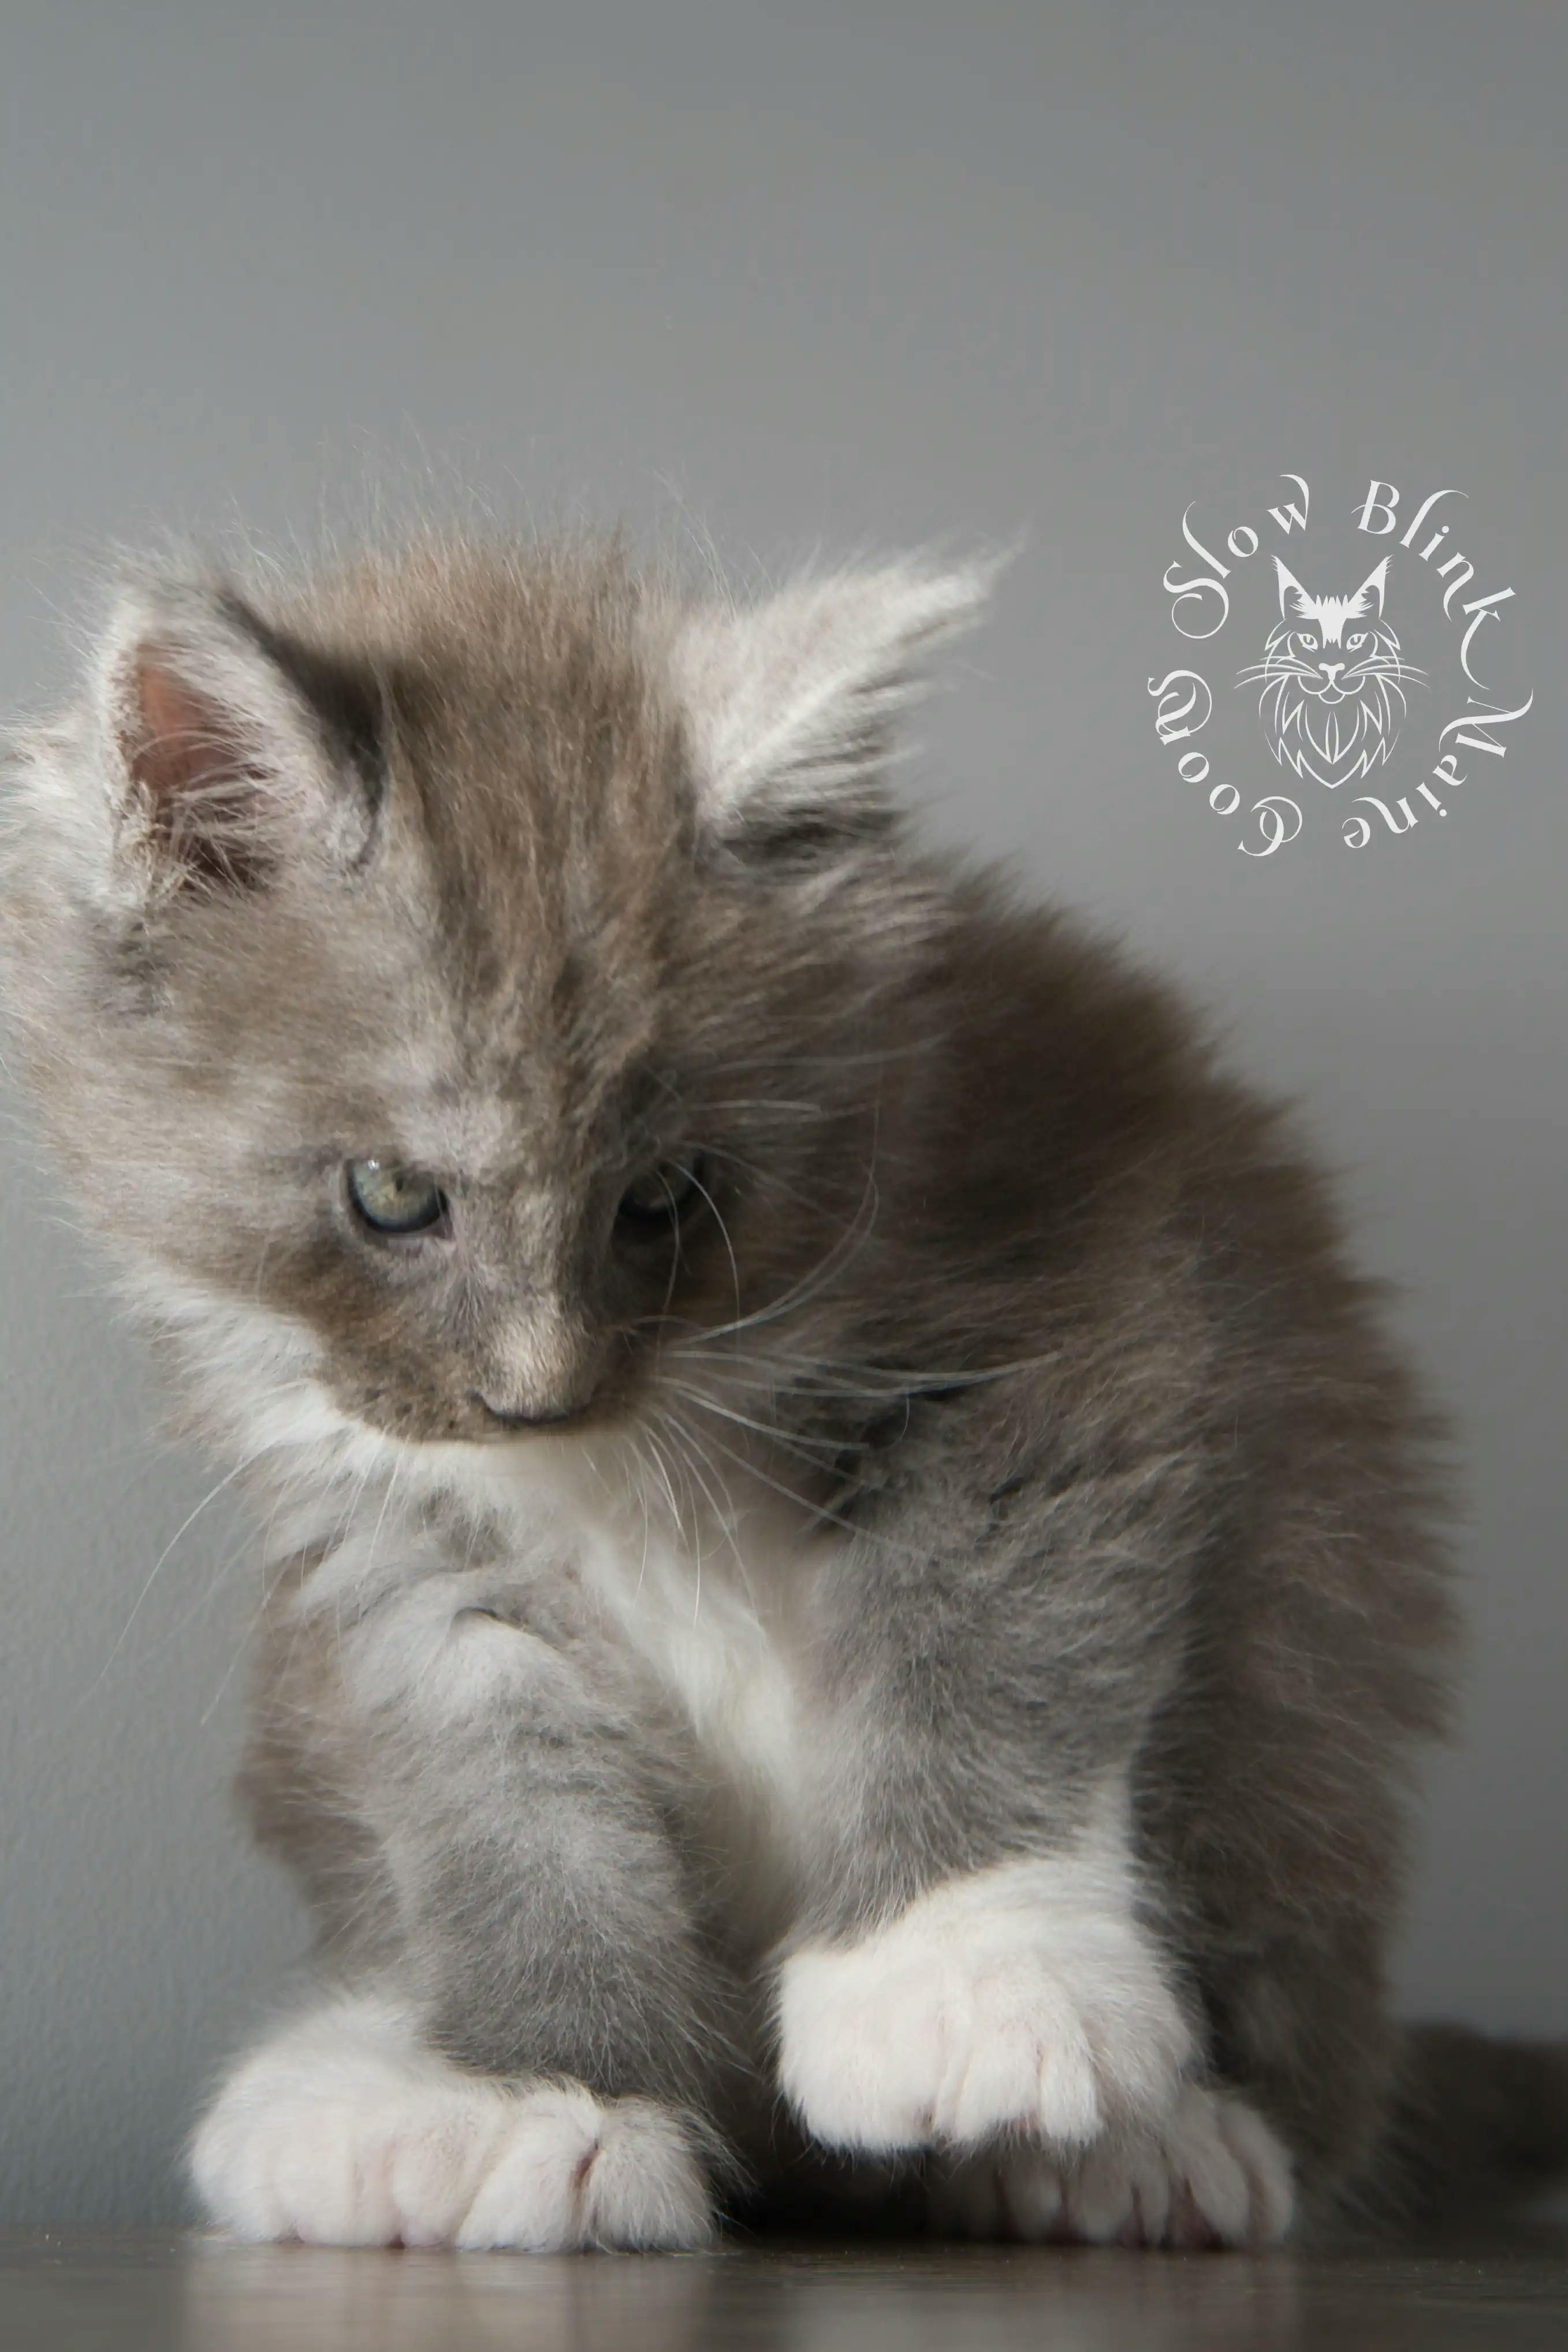 Bicolor Maine Coon Kittens > bicolor maine coon kitten | slowblinkmainecoons | ems code ns as 03 09 | 02 | 135